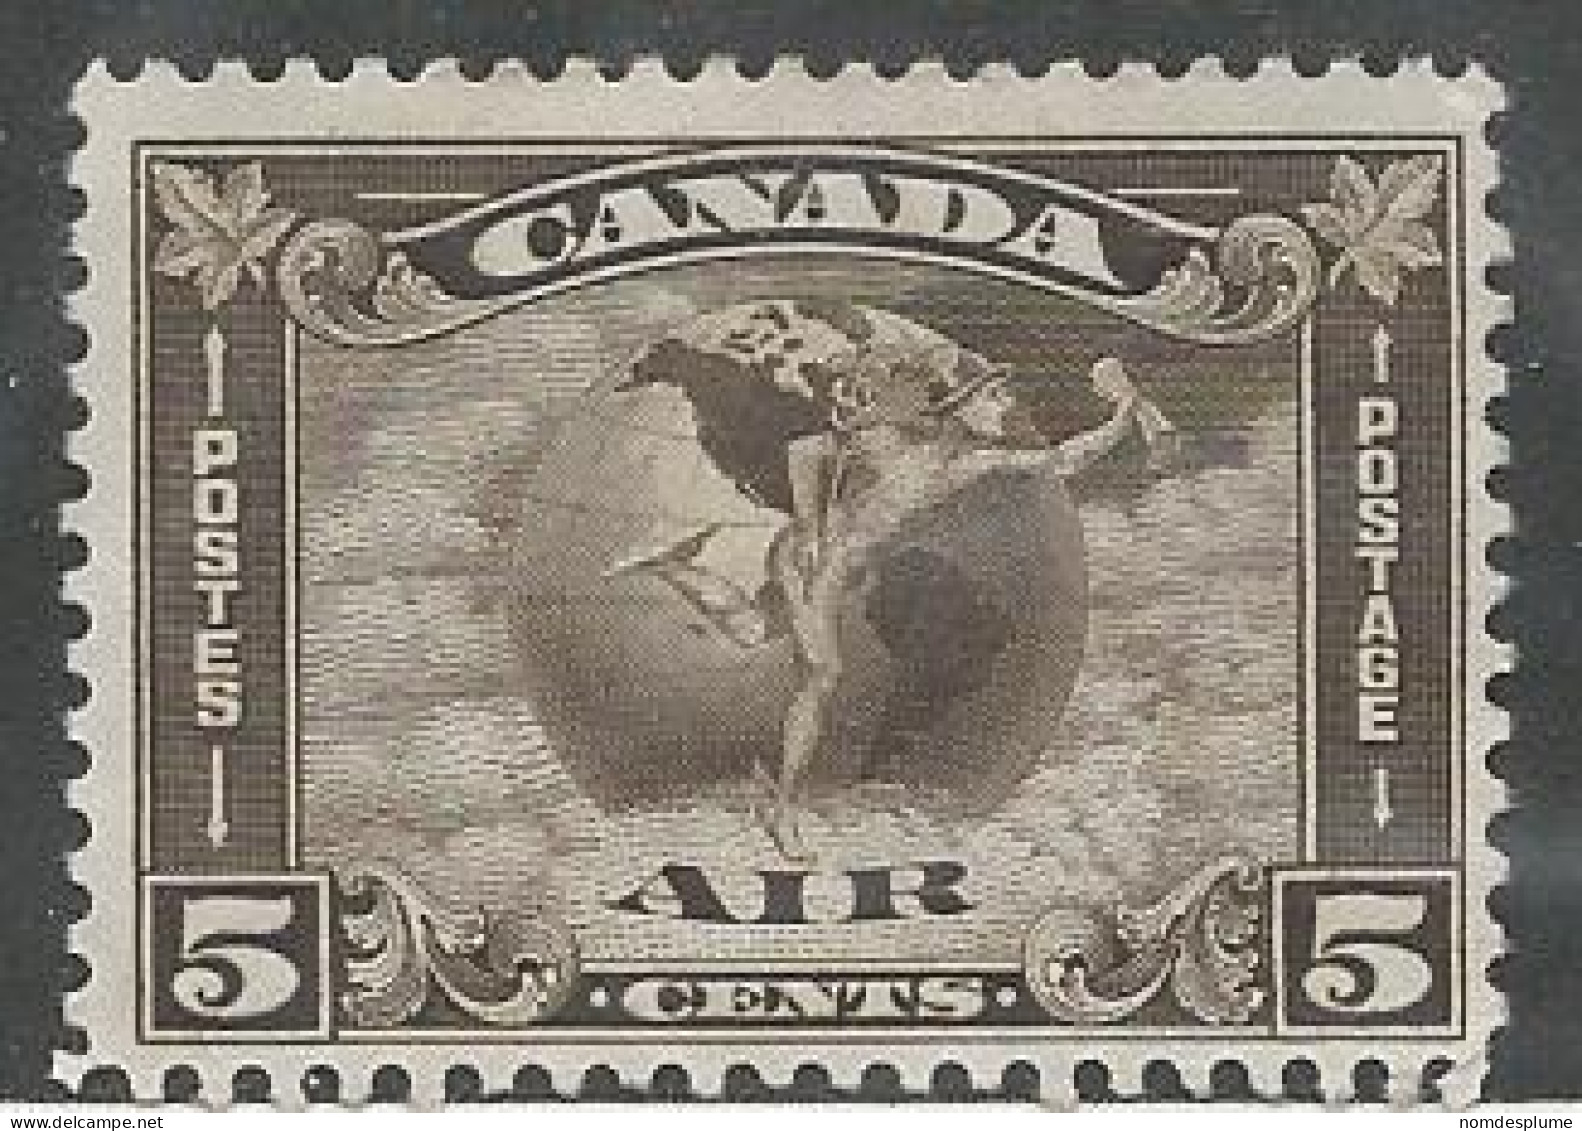 23332) Canada Airmail 1930 Used - Luftpost